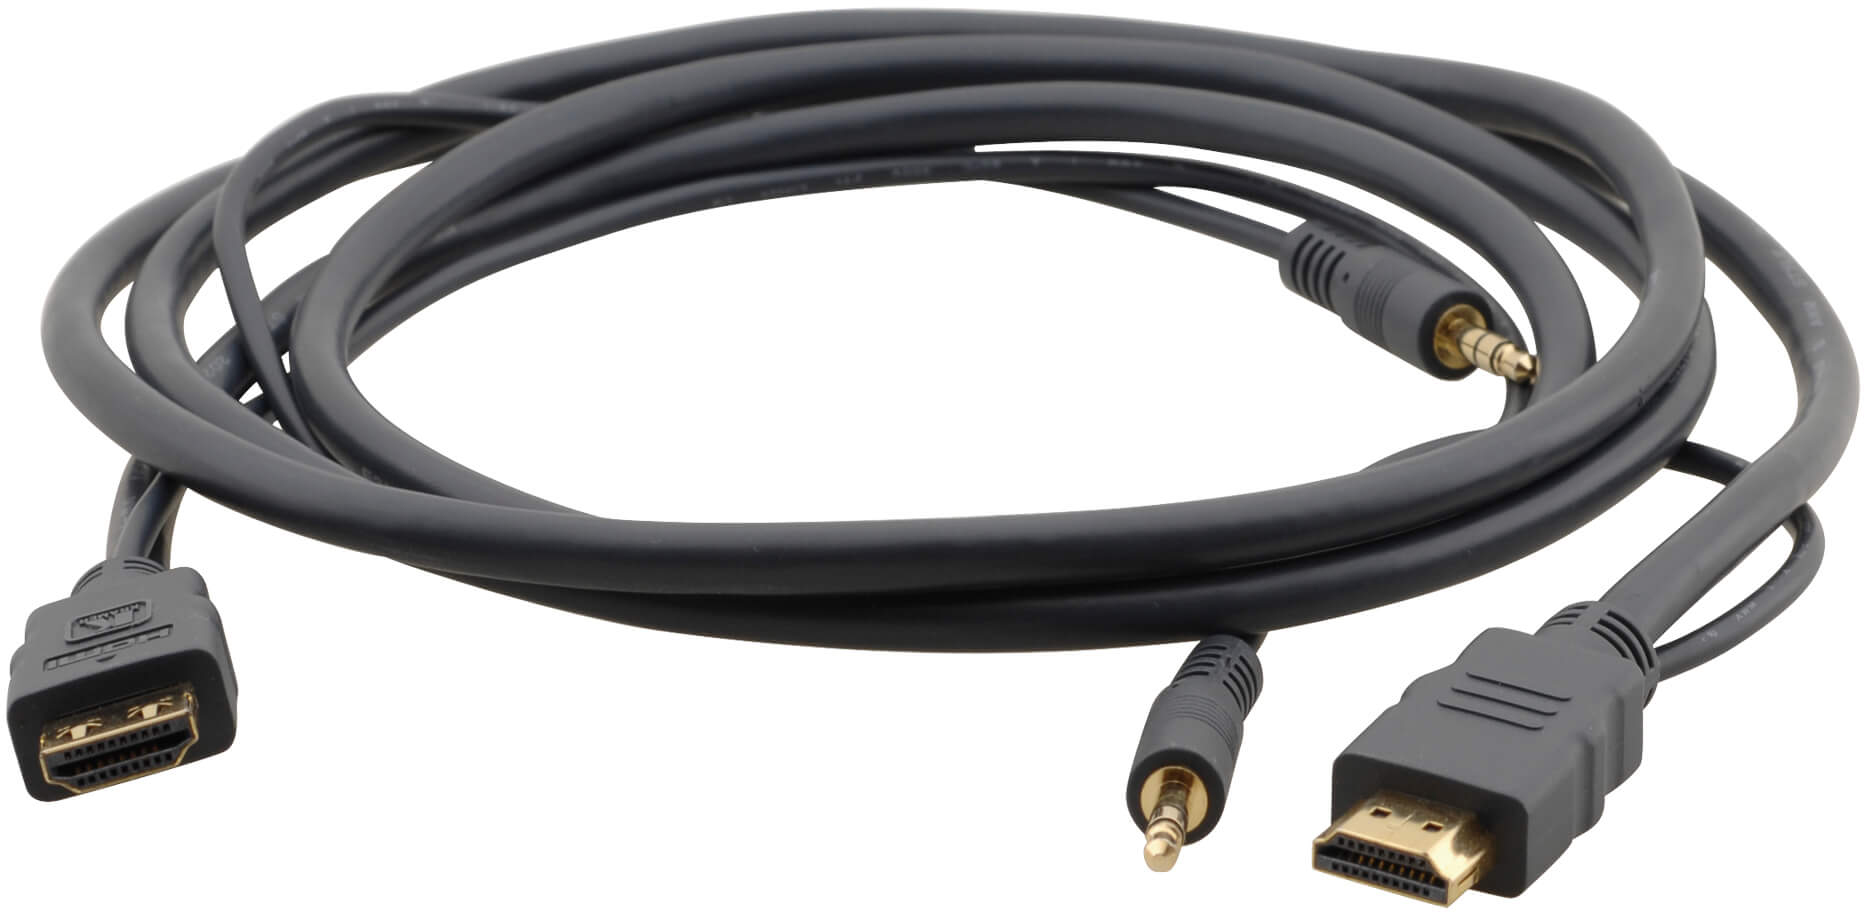 Kramer High–Speed HDMI Flexible Cable w/ Ethernet and 3.5mm Stereo Audio